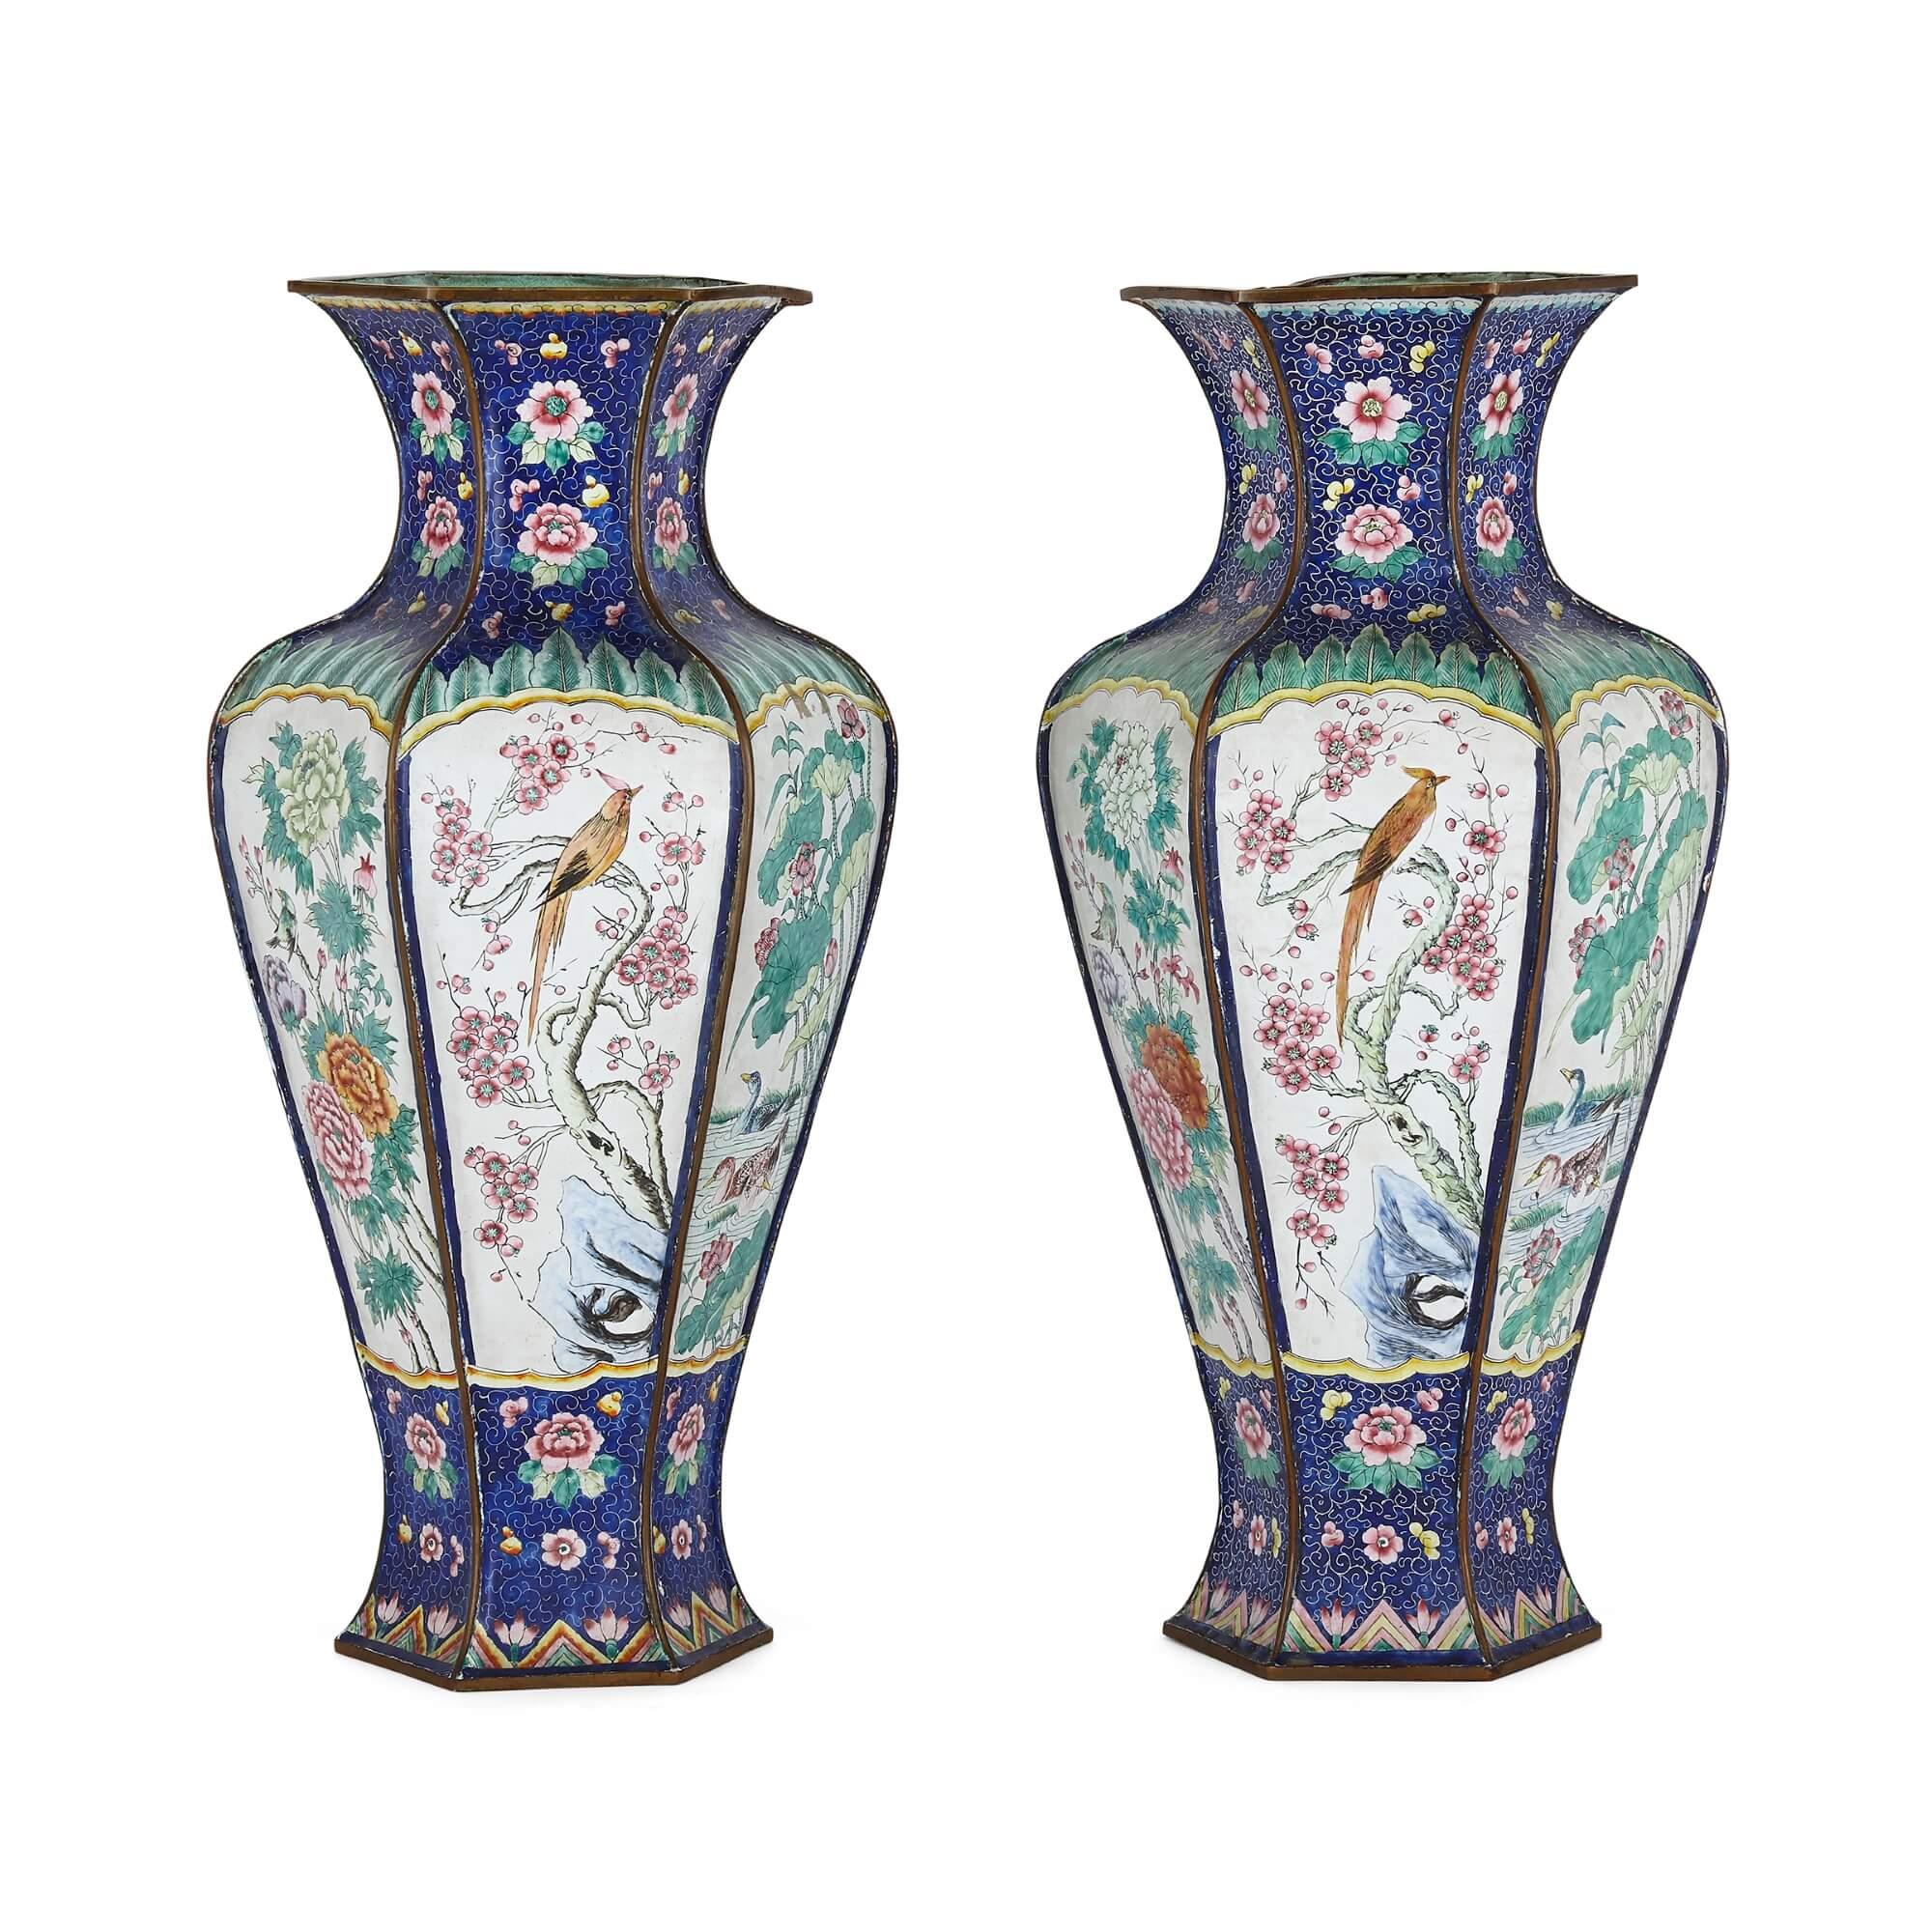 Pair of Chinese enamel vases
Chinese, 19th Century
Height 38cm, diameter 19cm

These charming Chinese vases are crafted from enamel. Each vase features a bulbous body with a flared foot and a waisted neck leading to a broad rim. The body of each is